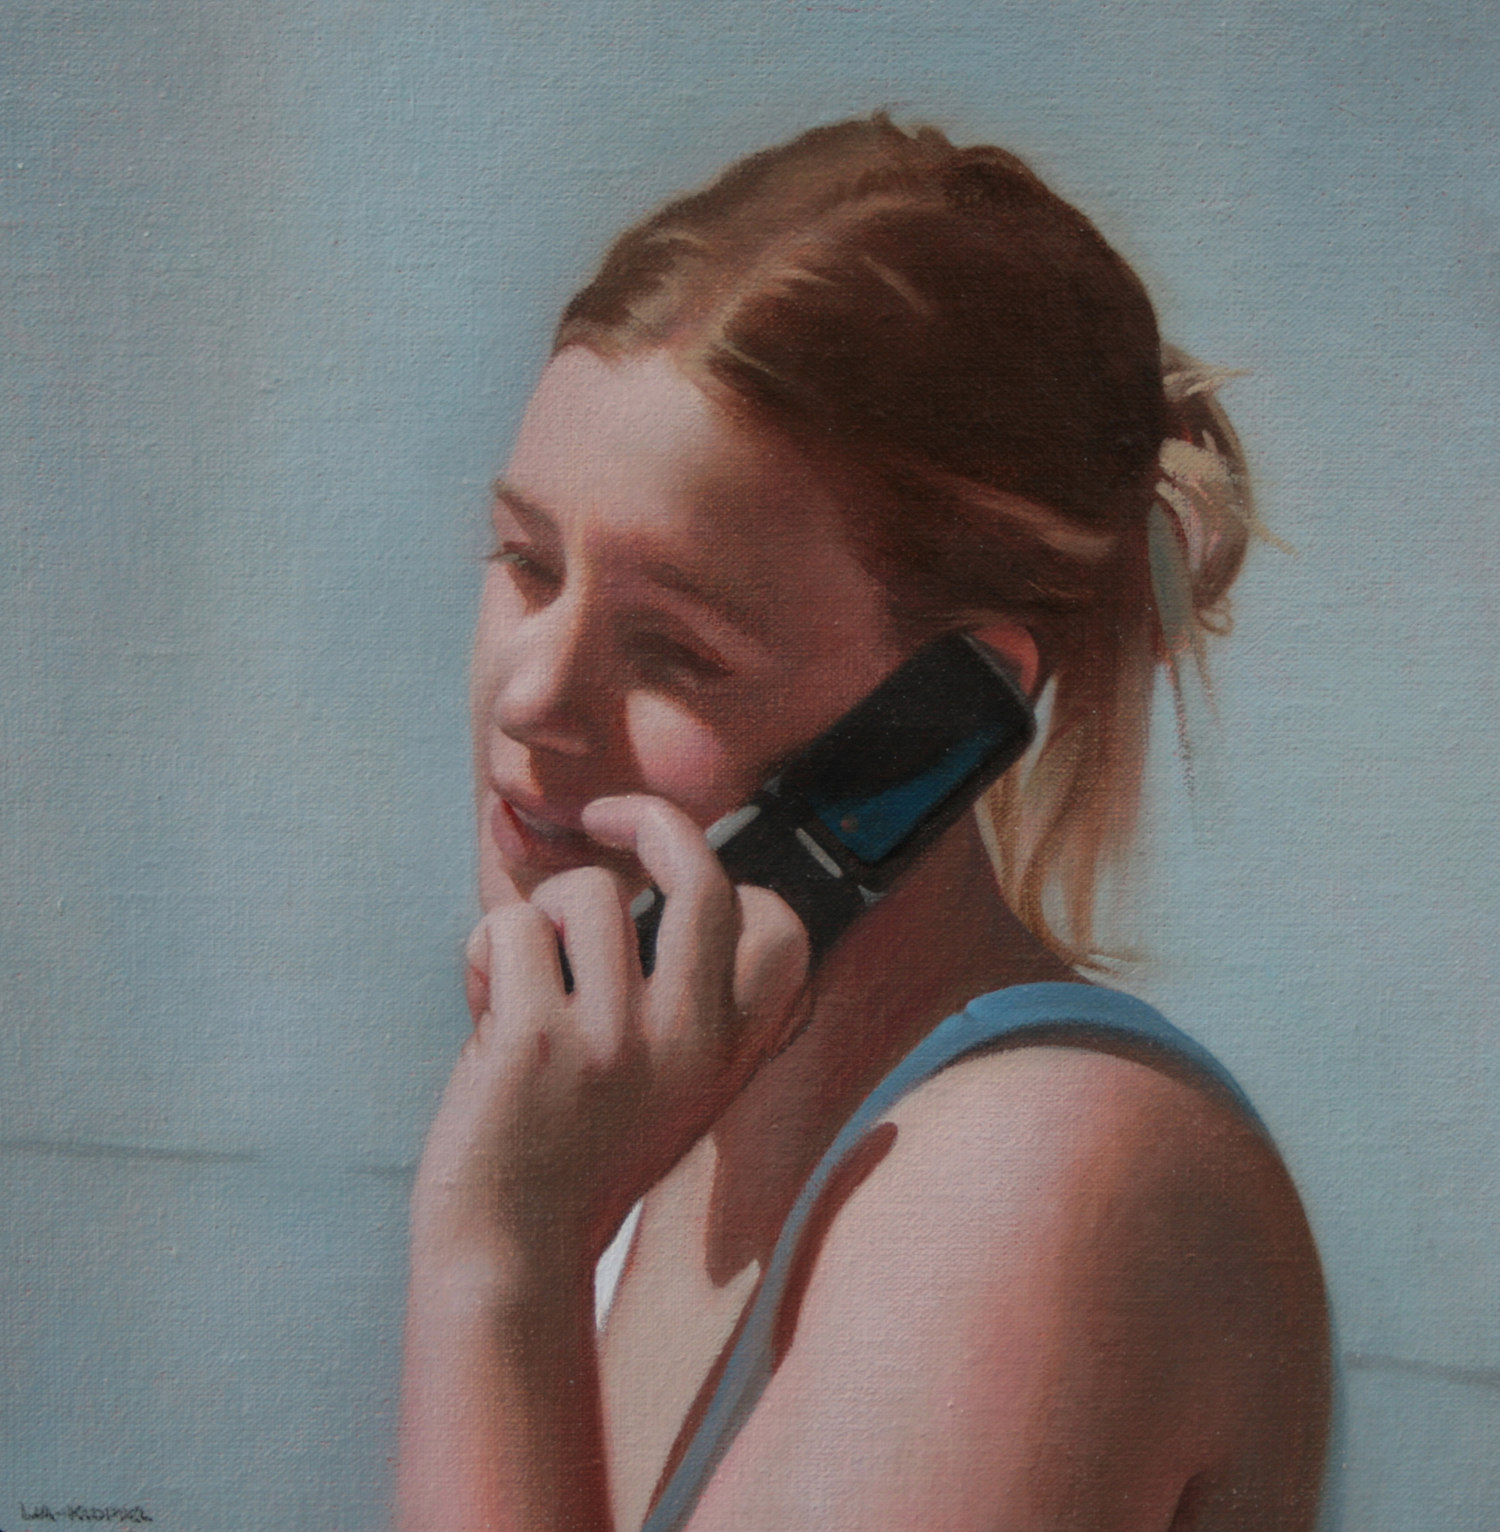   Talk ,&nbsp;2008,&nbsp;Oil on linen, 11 x 11 inches, Private collection 